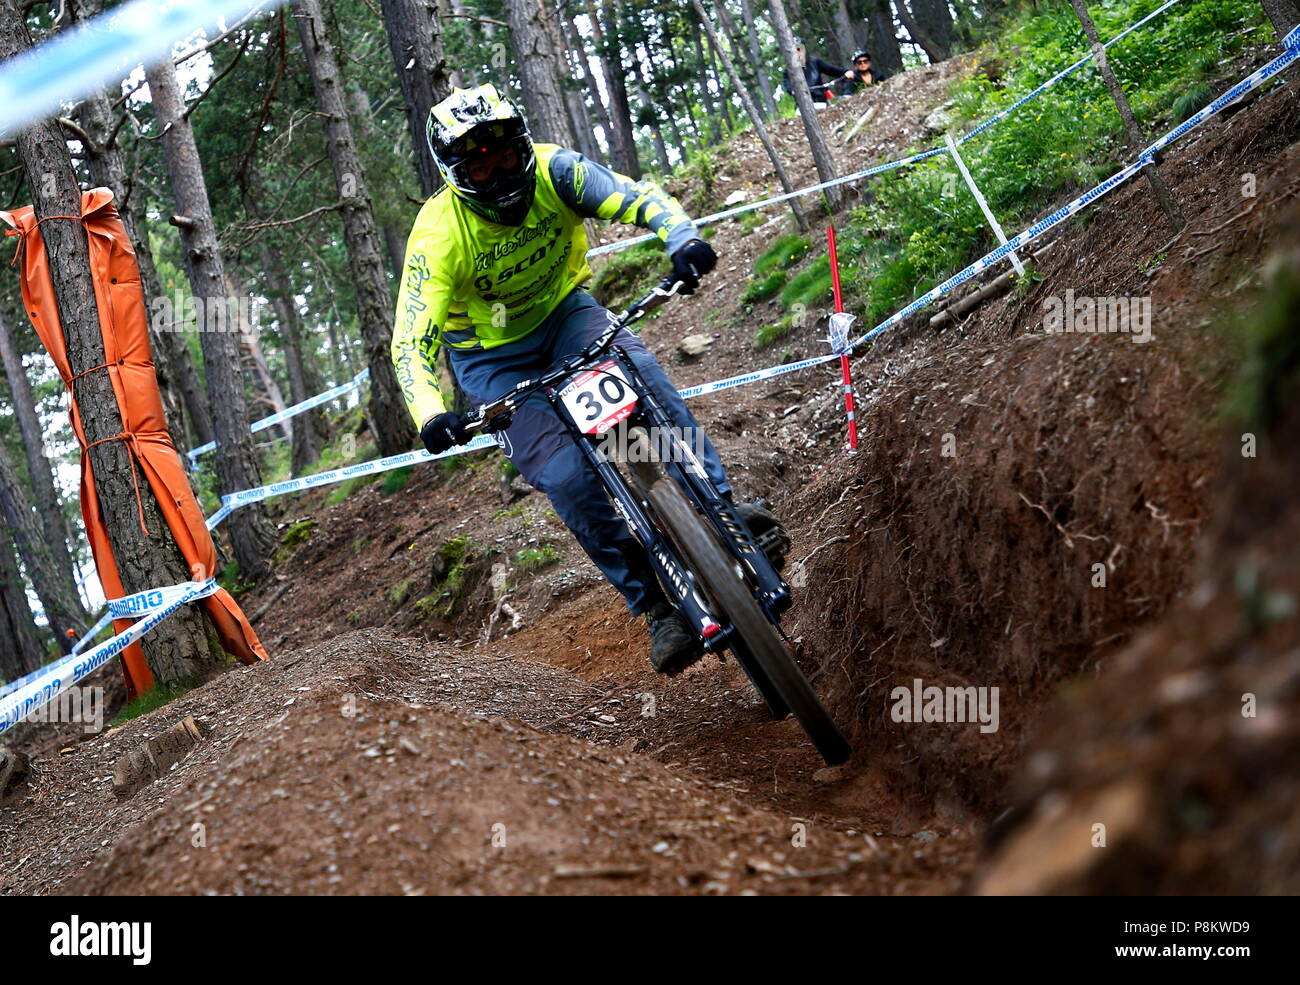 Vallnord, Andorra. 12th July 2018. Brendan Fairclough (GBR)Downhill  training sesion, UCI, Moutain Bike World Cup , Vallnord Andorra. 12/07/2018  Credit: Joma/Alamy Live News Stock Photo - Alamy